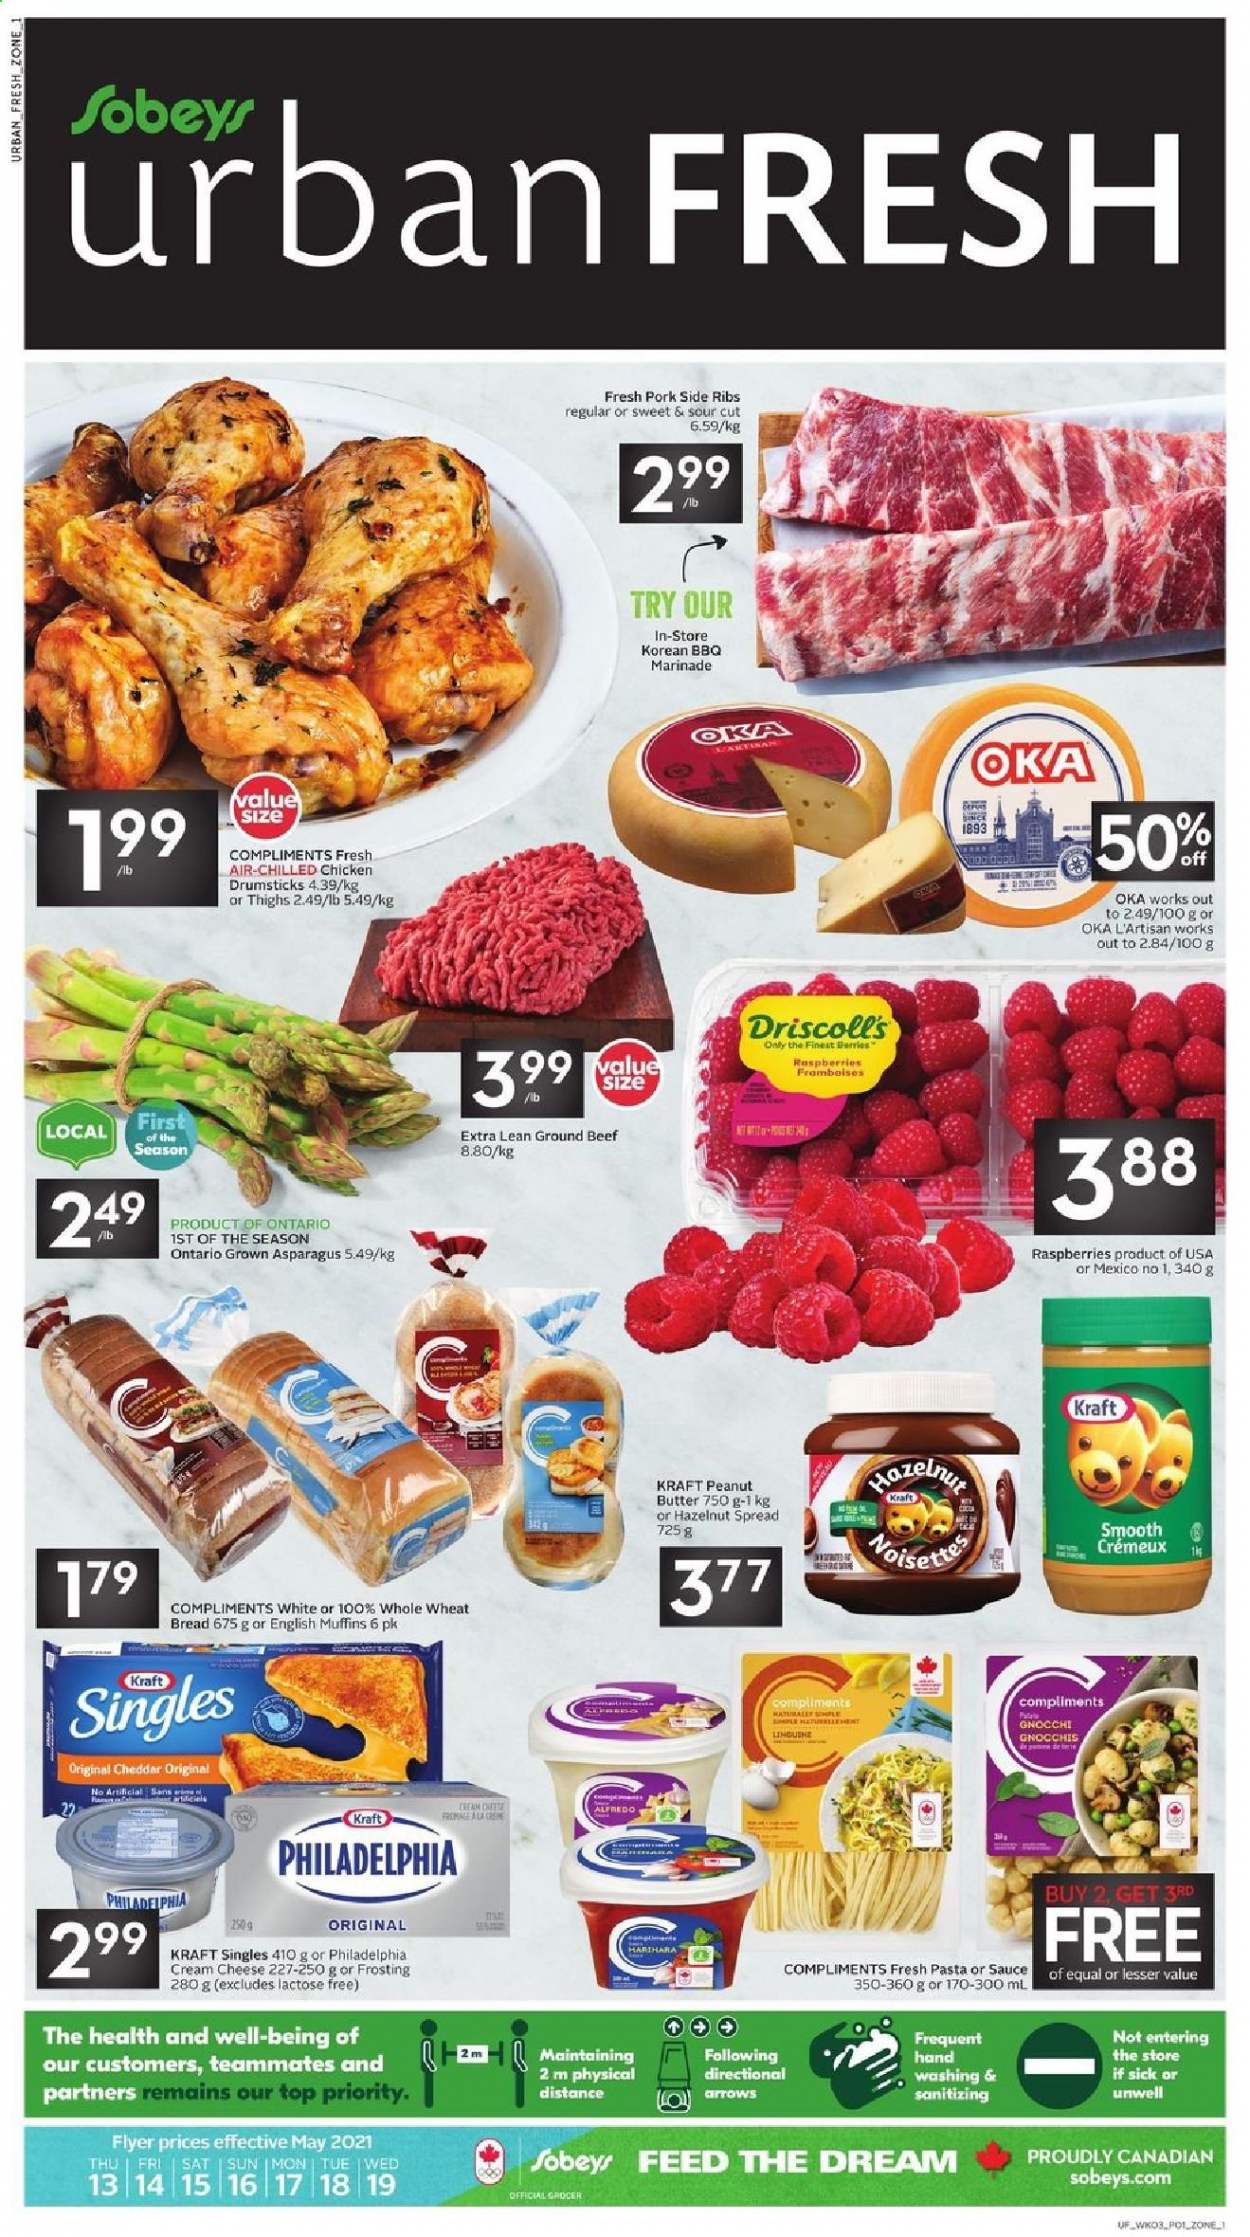 thumbnail - Sobeys Urban Fresh Flyer - May 13, 2021 - May 19, 2021 - Sales products - english muffins, wheat bread, asparagus, Kraft®, cream cheese, sandwich slices, cheddar, cheese, Kraft Singles, frosting, marinade, peanut butter, hazelnut spread, chicken drumsticks, chicken, beef meat, ground beef, gnocchi. Page 1.